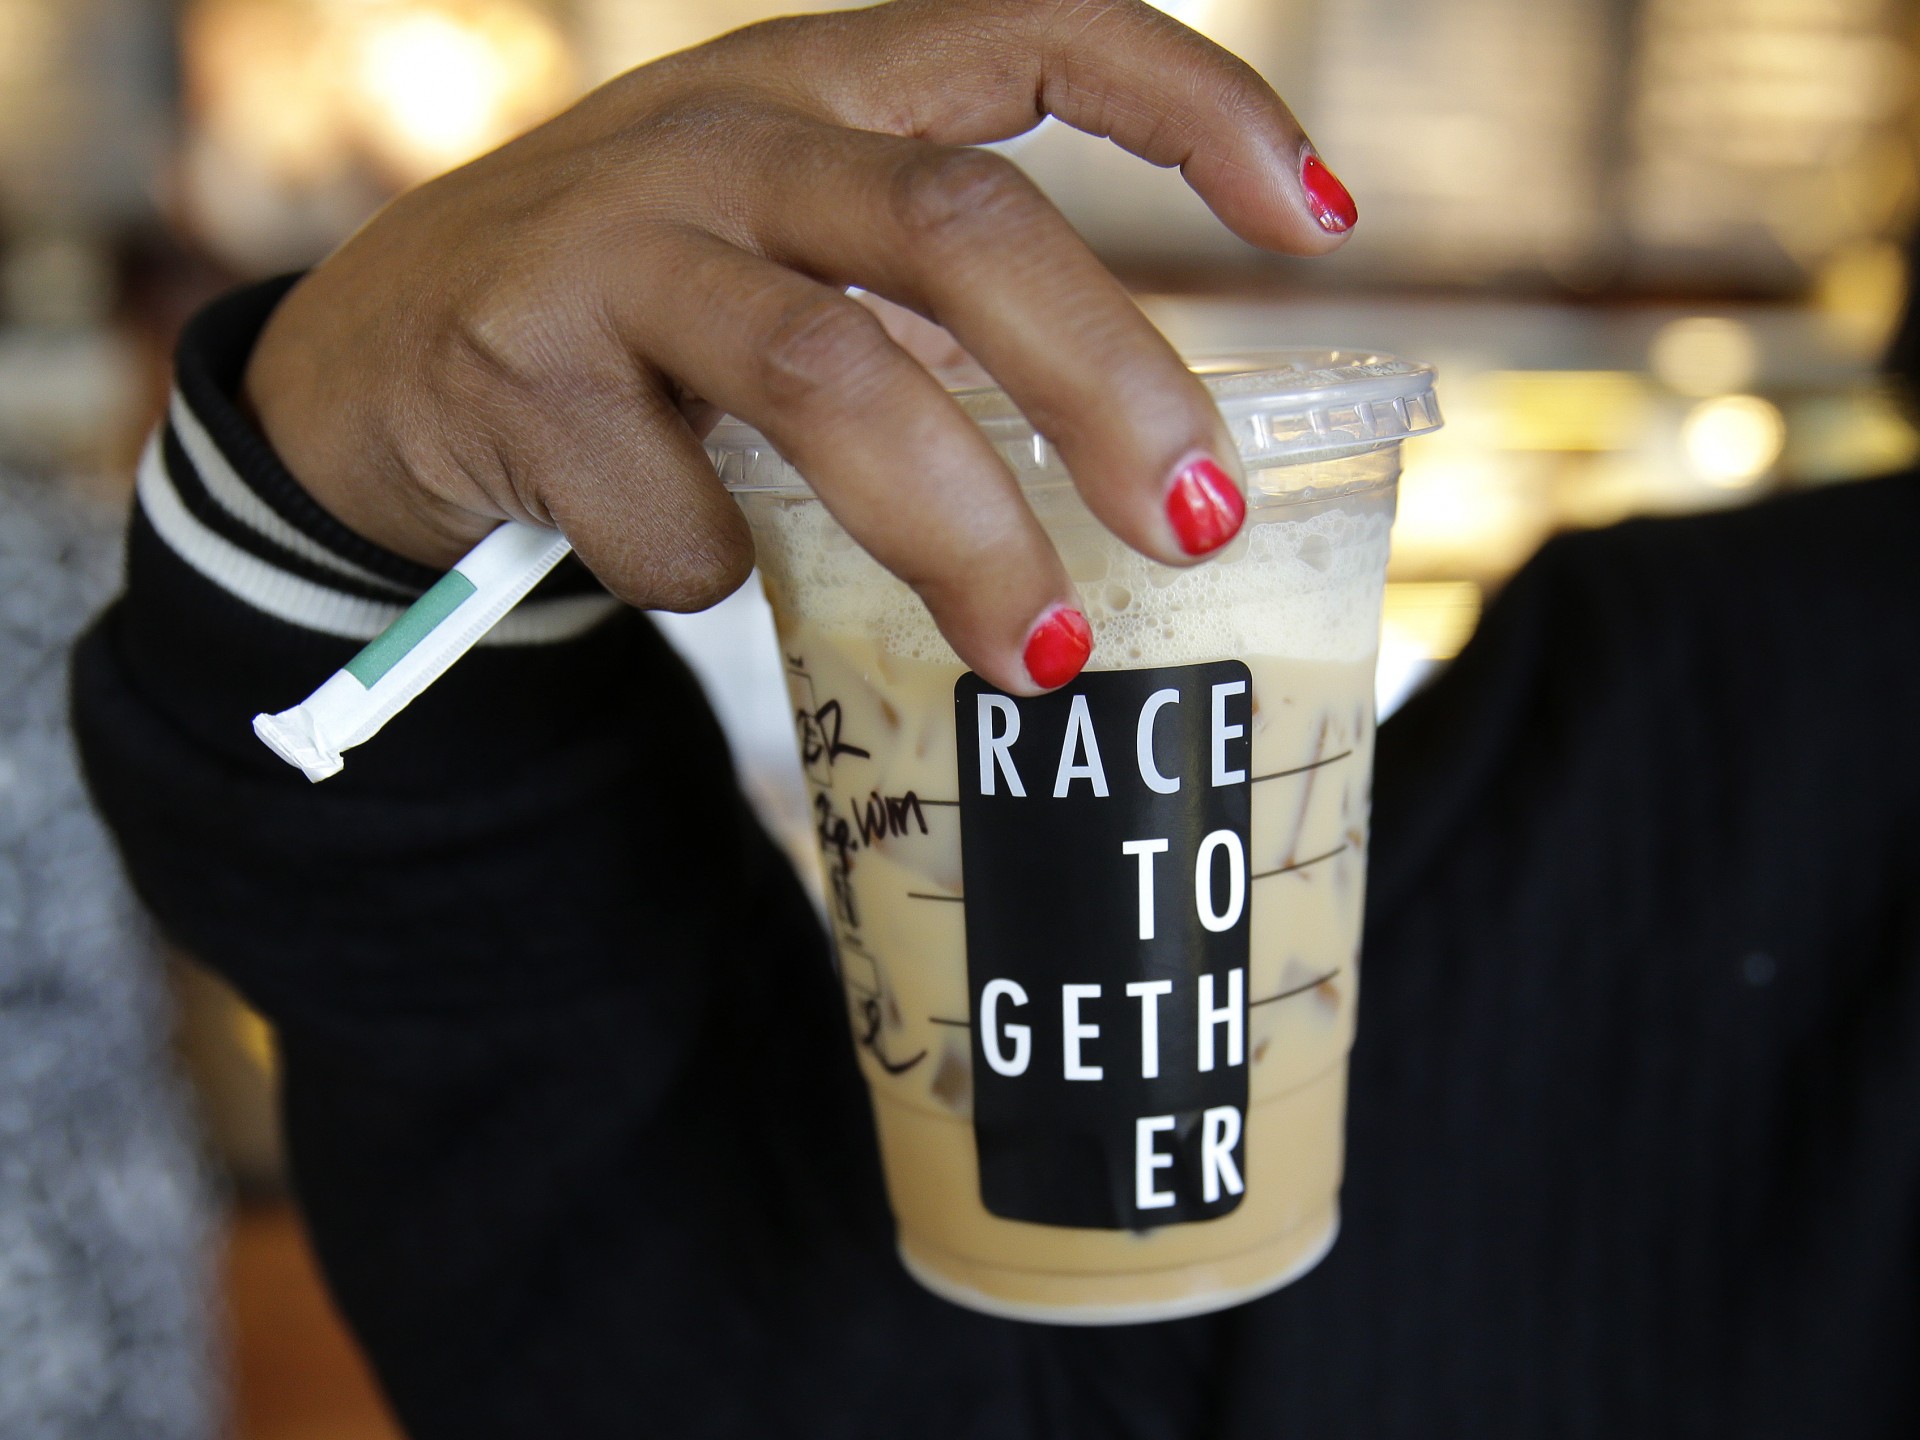 Larenda Myres holds an iced coffee drink with a "Race Together" sticker on it at a Starbucks store in Seattle. Starbucks baristas will no longer write "Race Together" on customers' cups starting Sunday. Photo: Ted S. Warren/AP